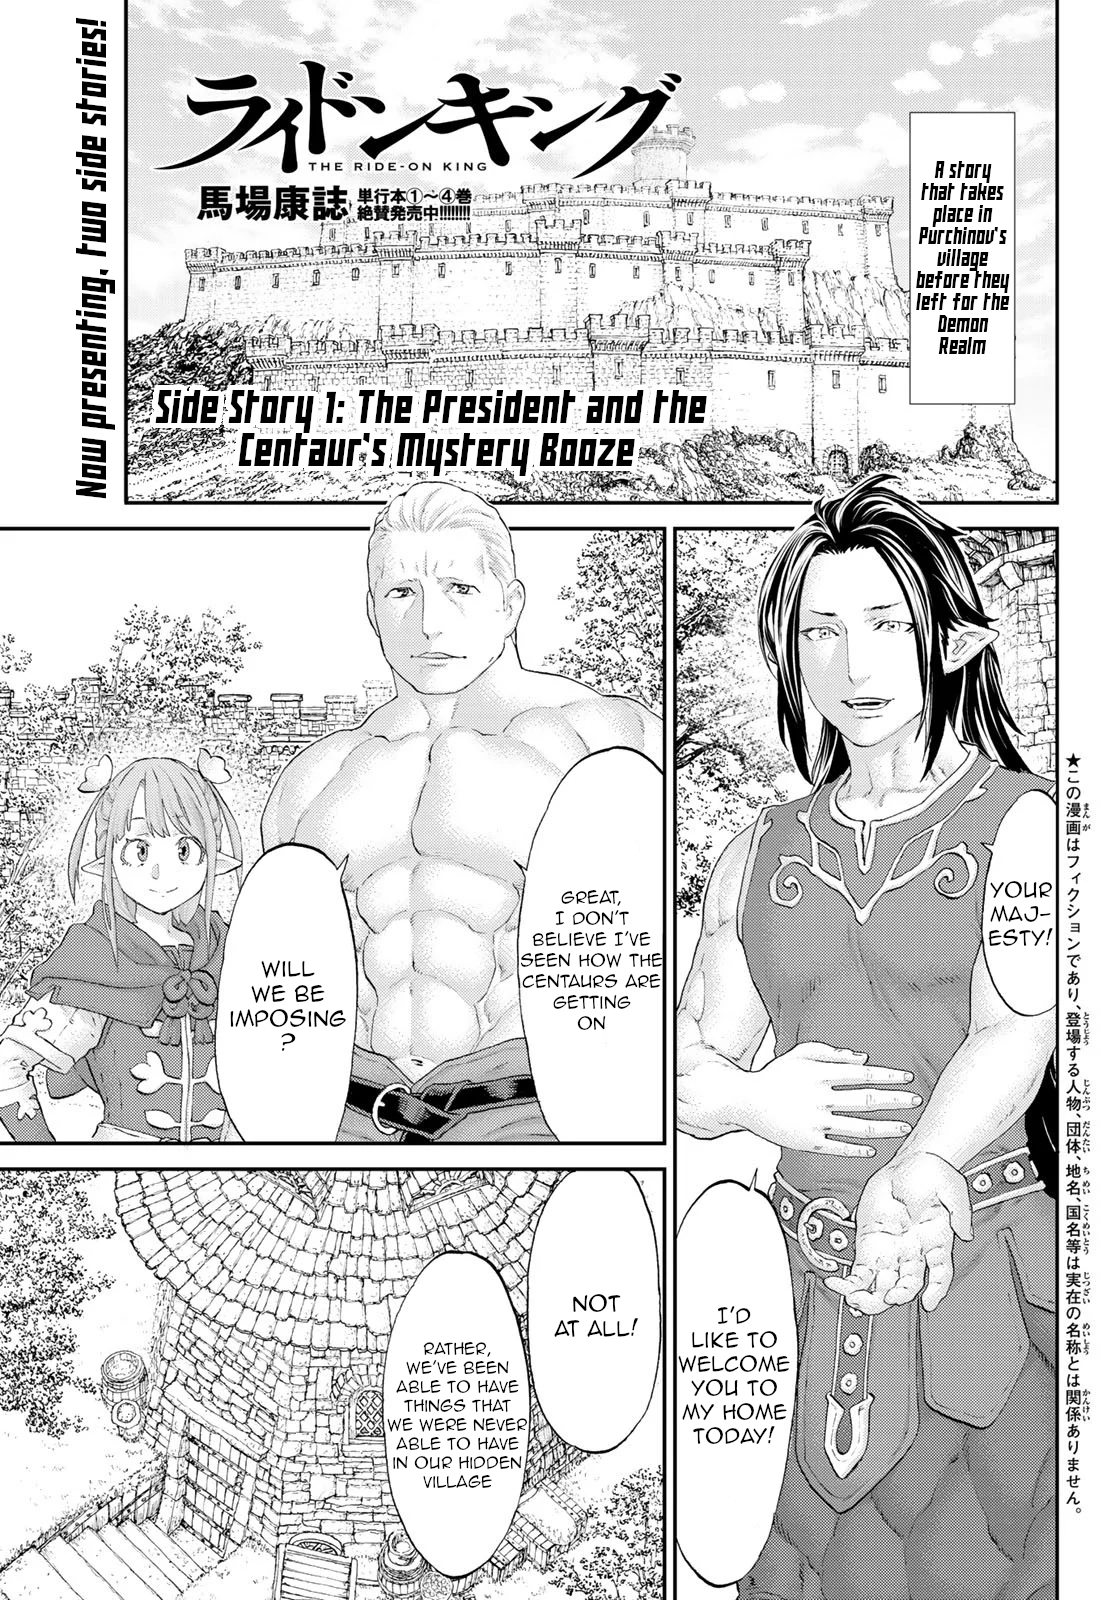 The Ride-On King Chapter 26.5: The President And The Centaur's Mystery Booze/ultimate Seasoning - Picture 1